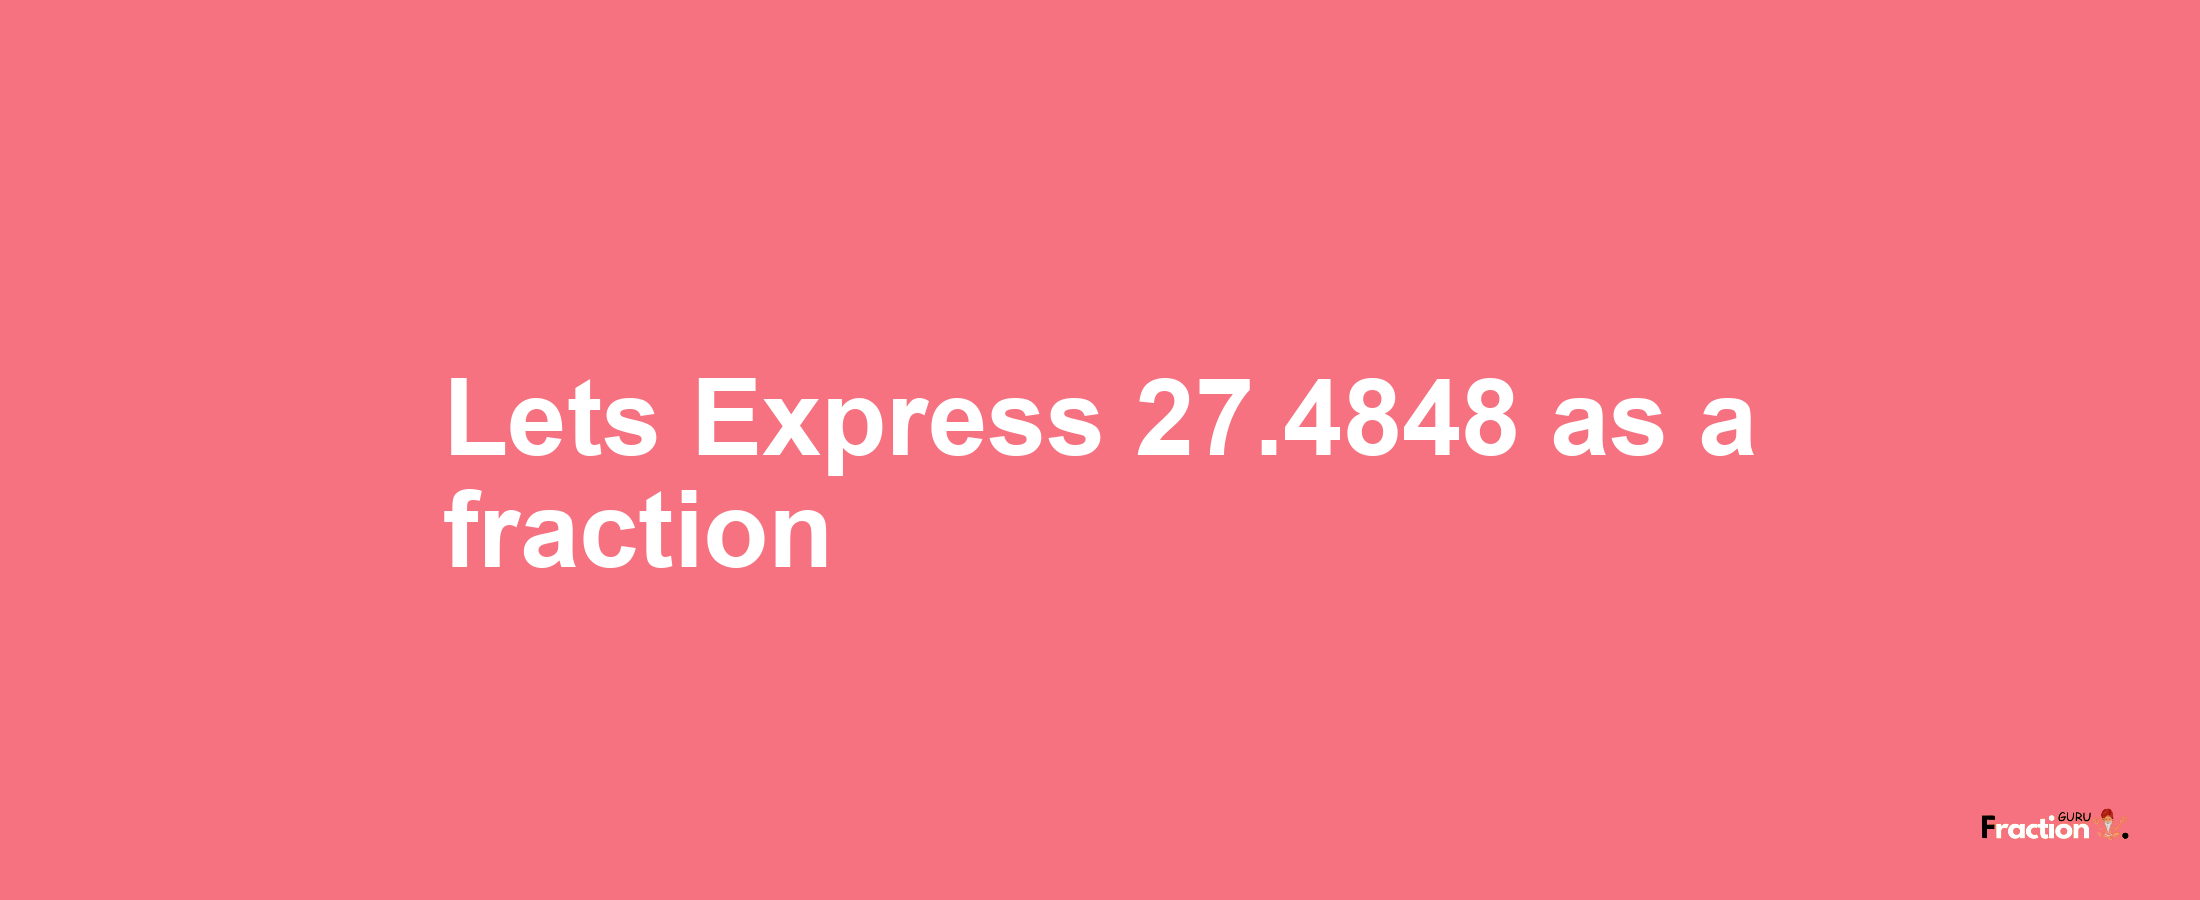 Lets Express 27.4848 as afraction